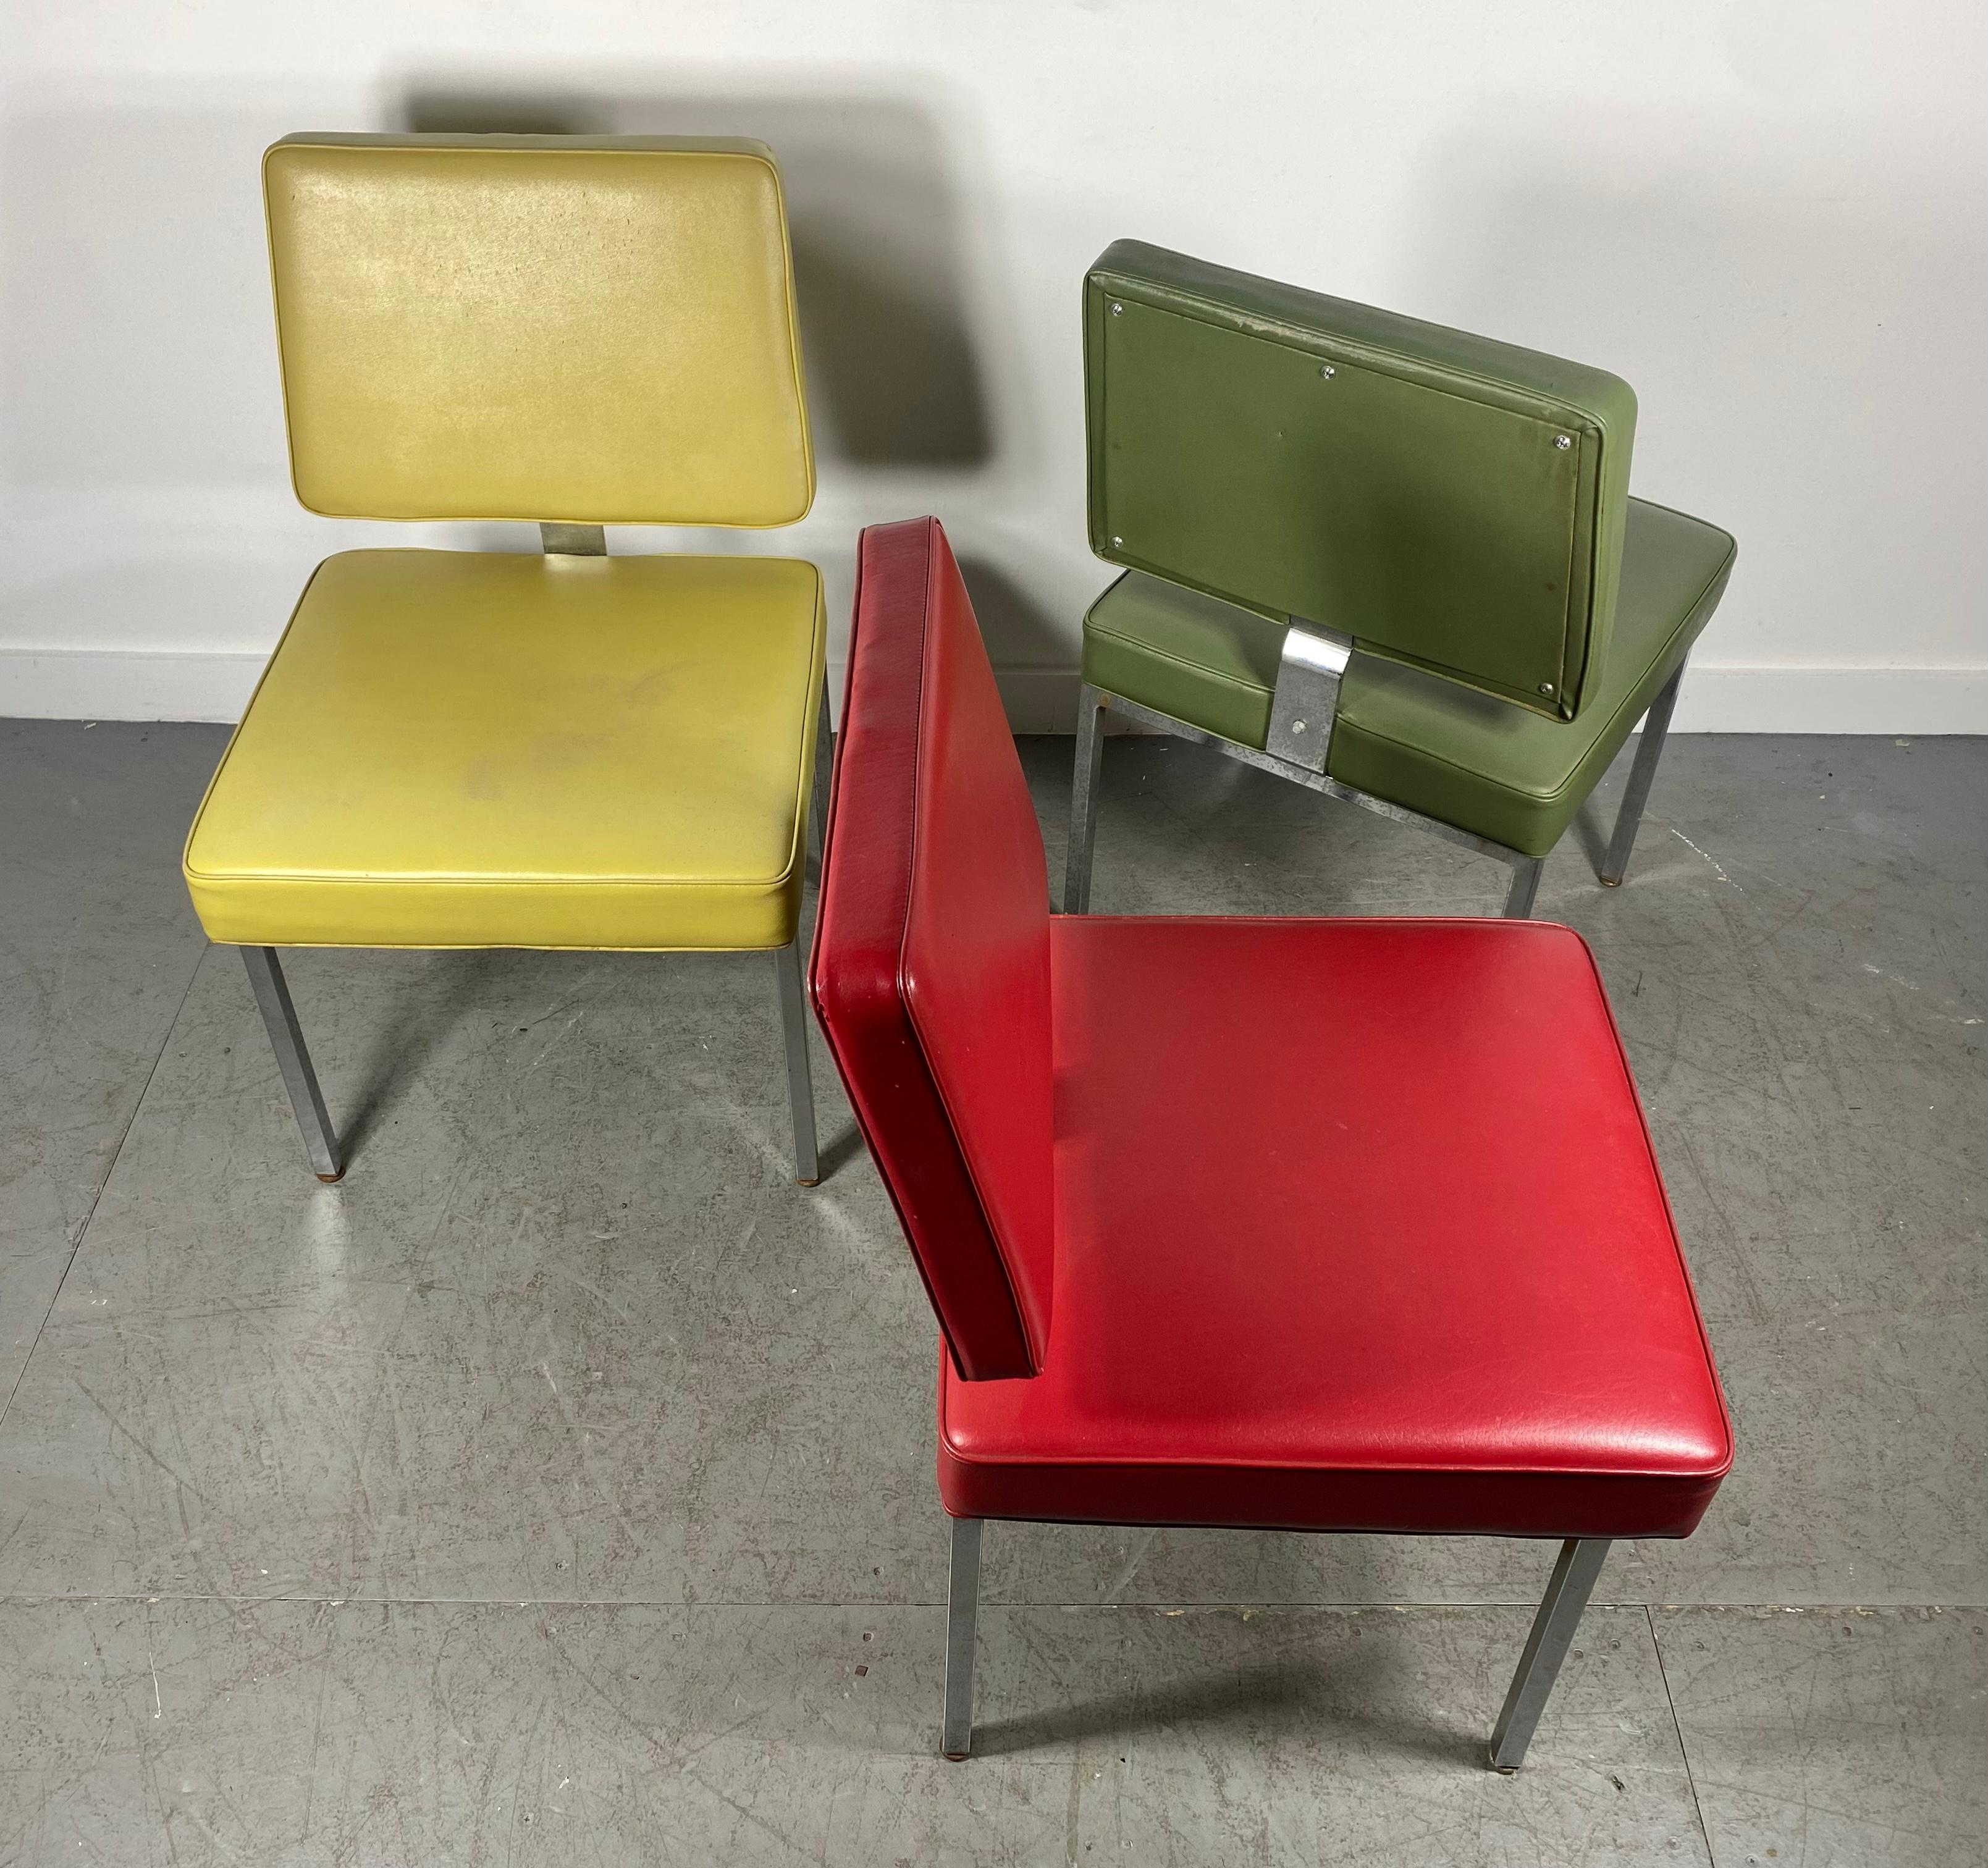 Classic Mid-Century Modern Knoll Style Chrome Side Chairs / Signore Inc (amerikanisch) im Angebot